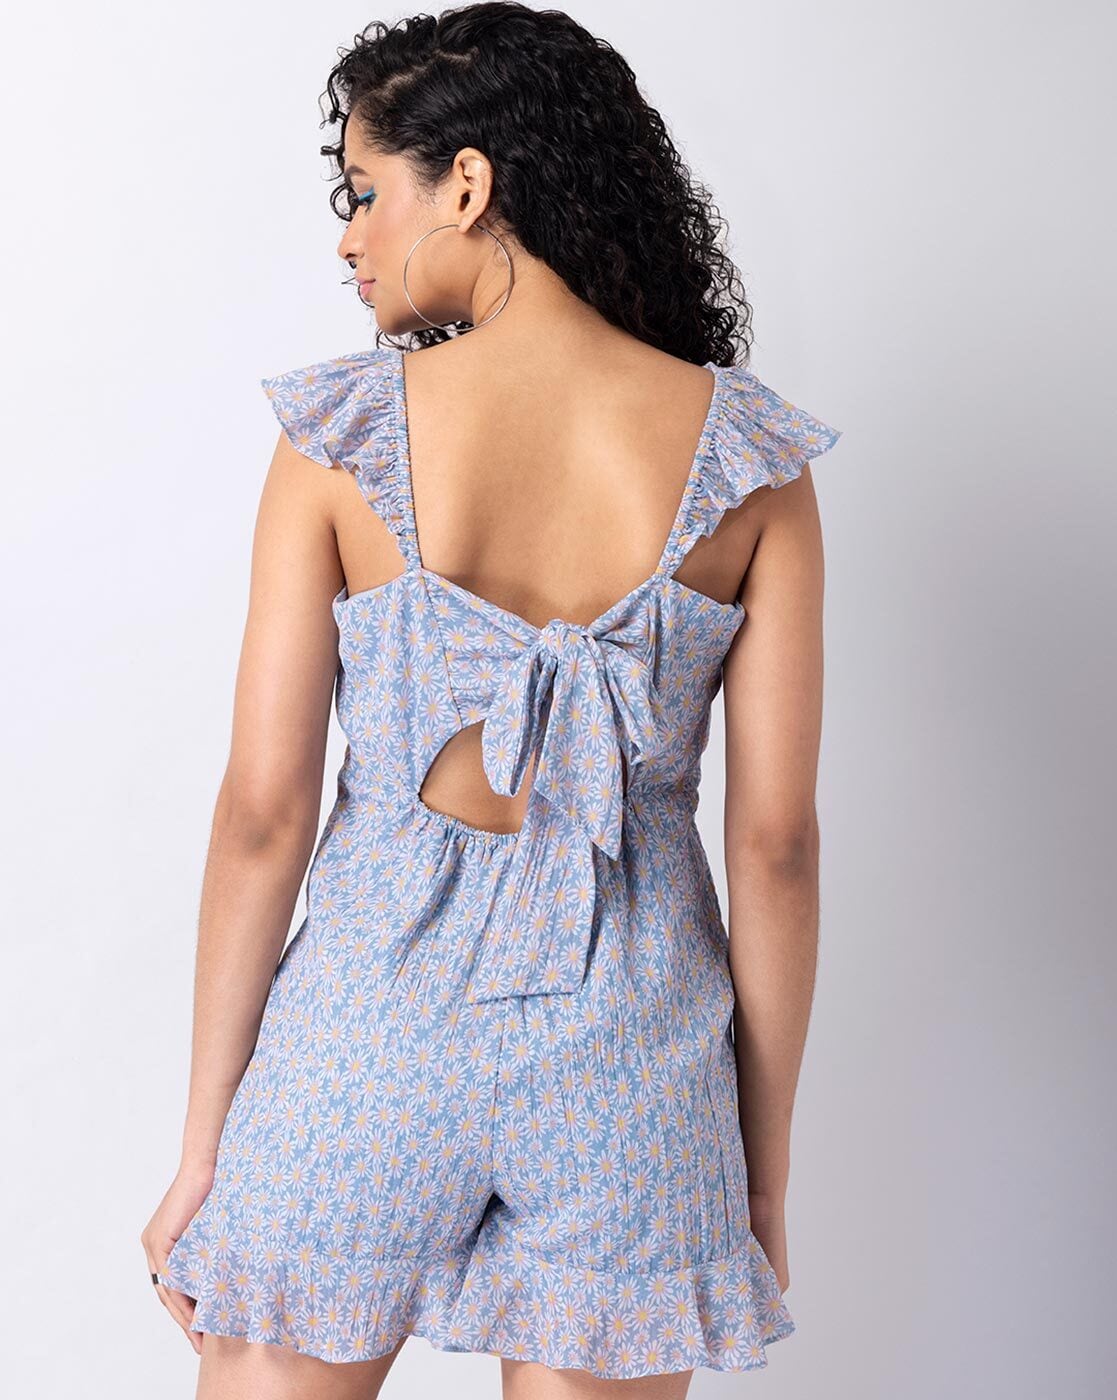 Faballey Dresses Jumpsuit - Buy Faballey Dresses Jumpsuit online in India